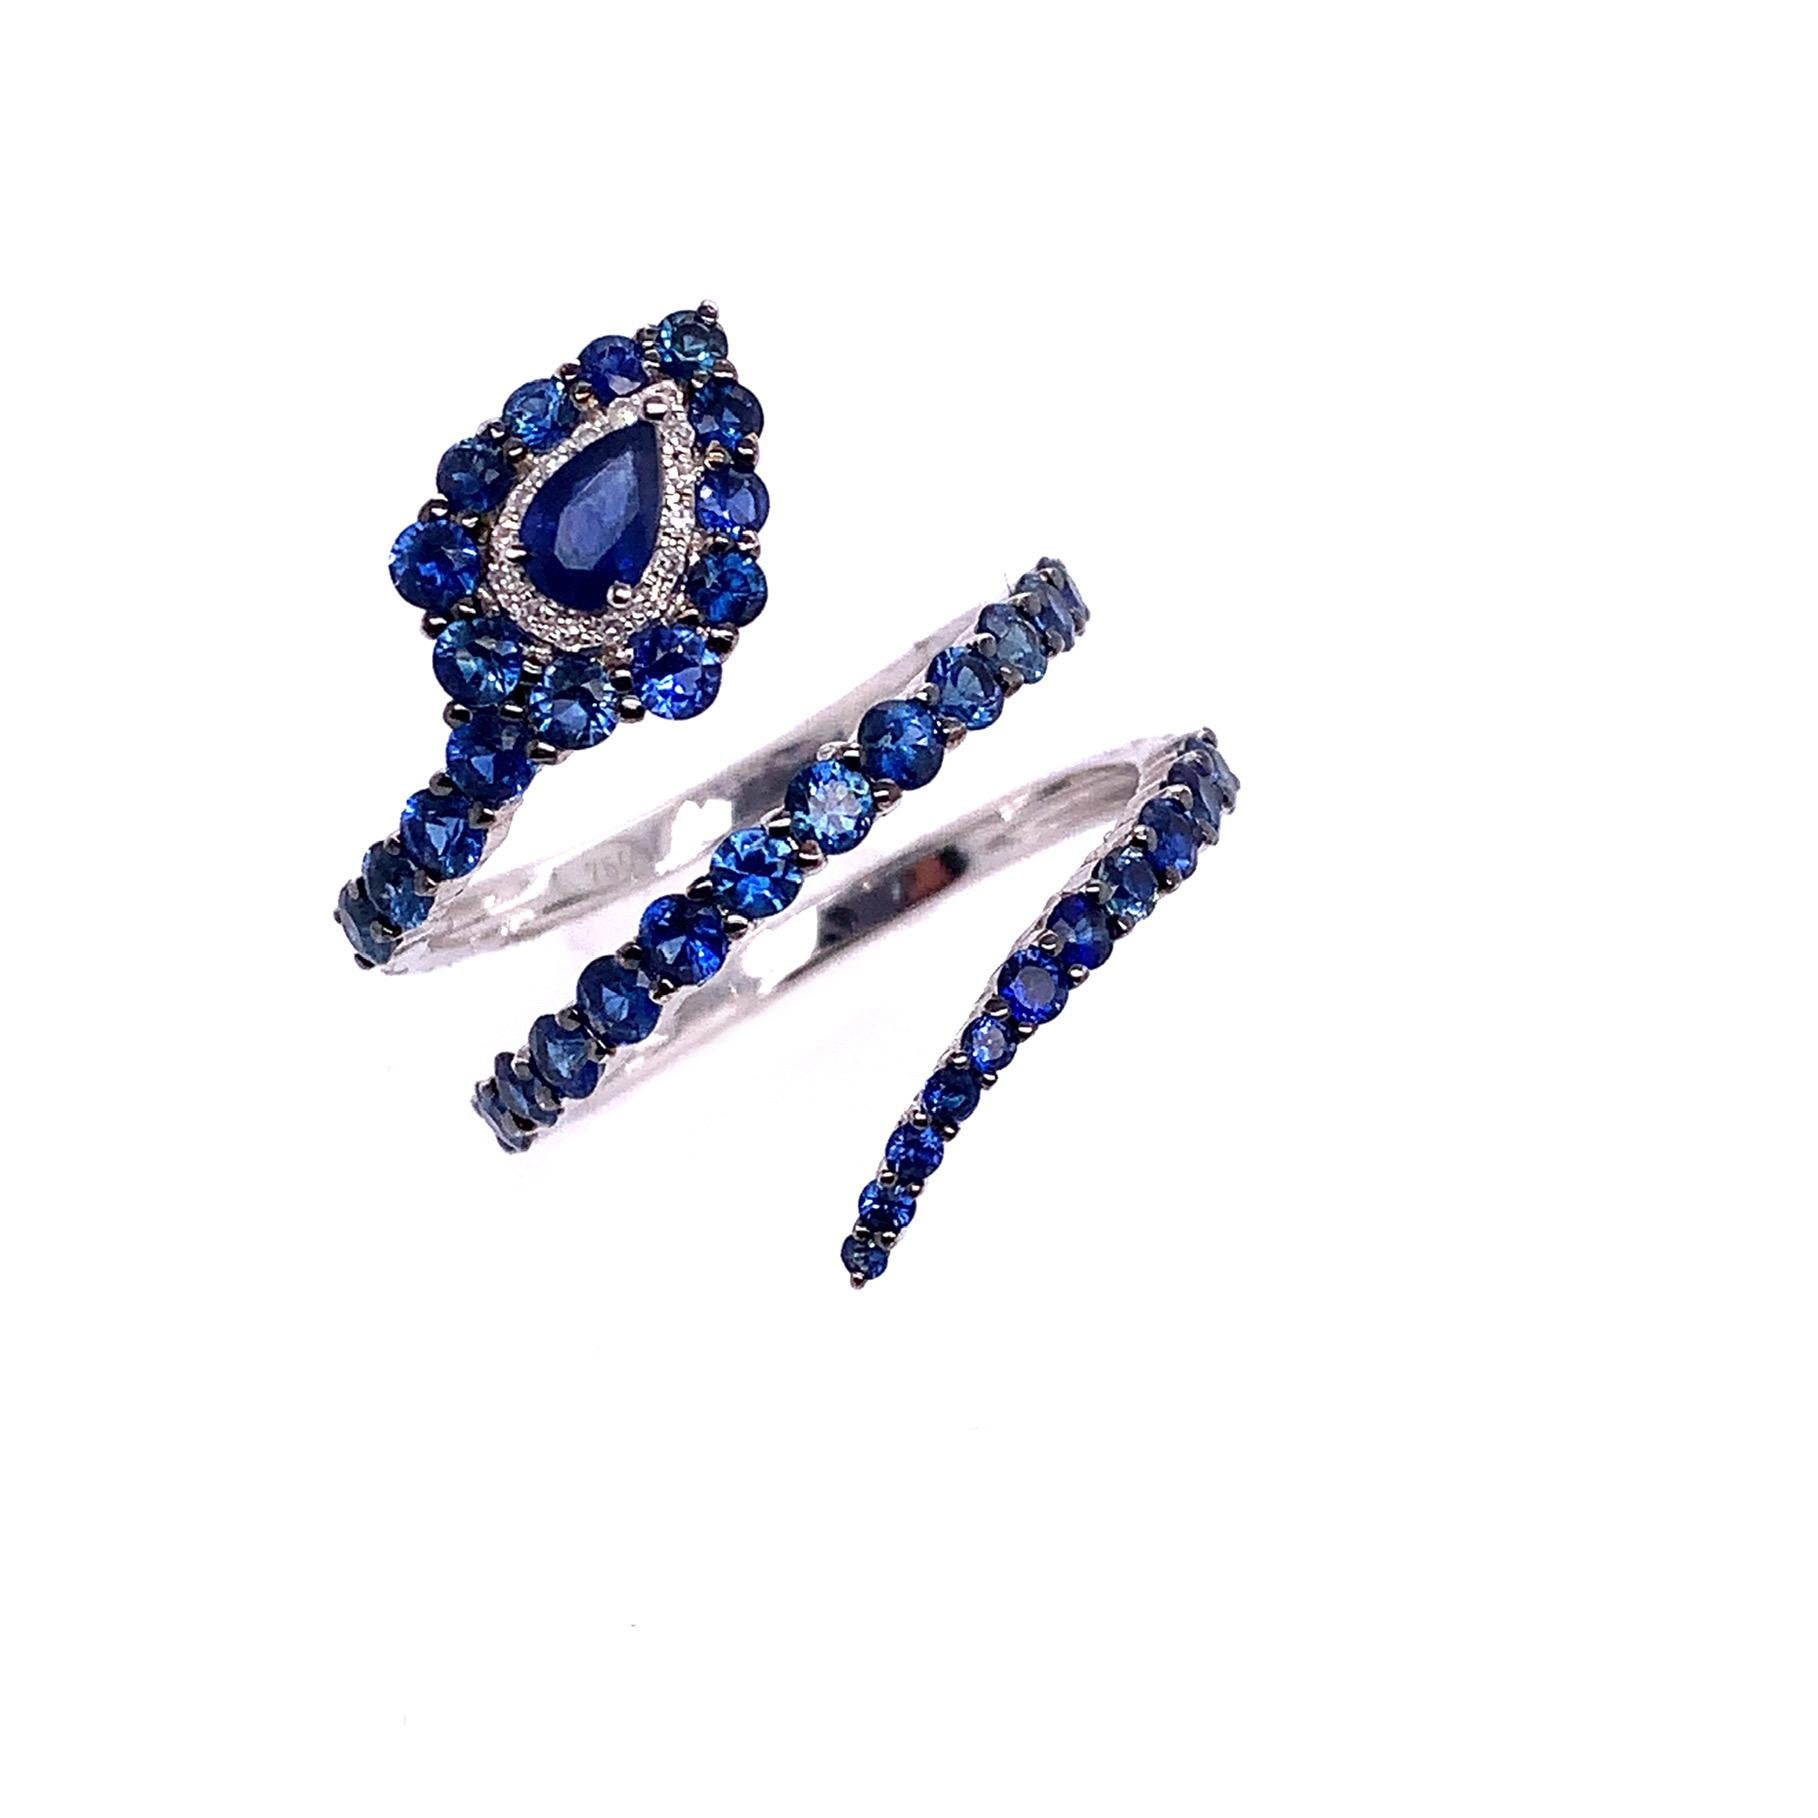 Skylight Collection

Delicate snake ring with blue Sapphire set in 18K white and blackened gold. Size 6.5 U.S.

Blue Sapphire : 2.08 ct total weight.
Diamond : 0.04 ct total weight.
